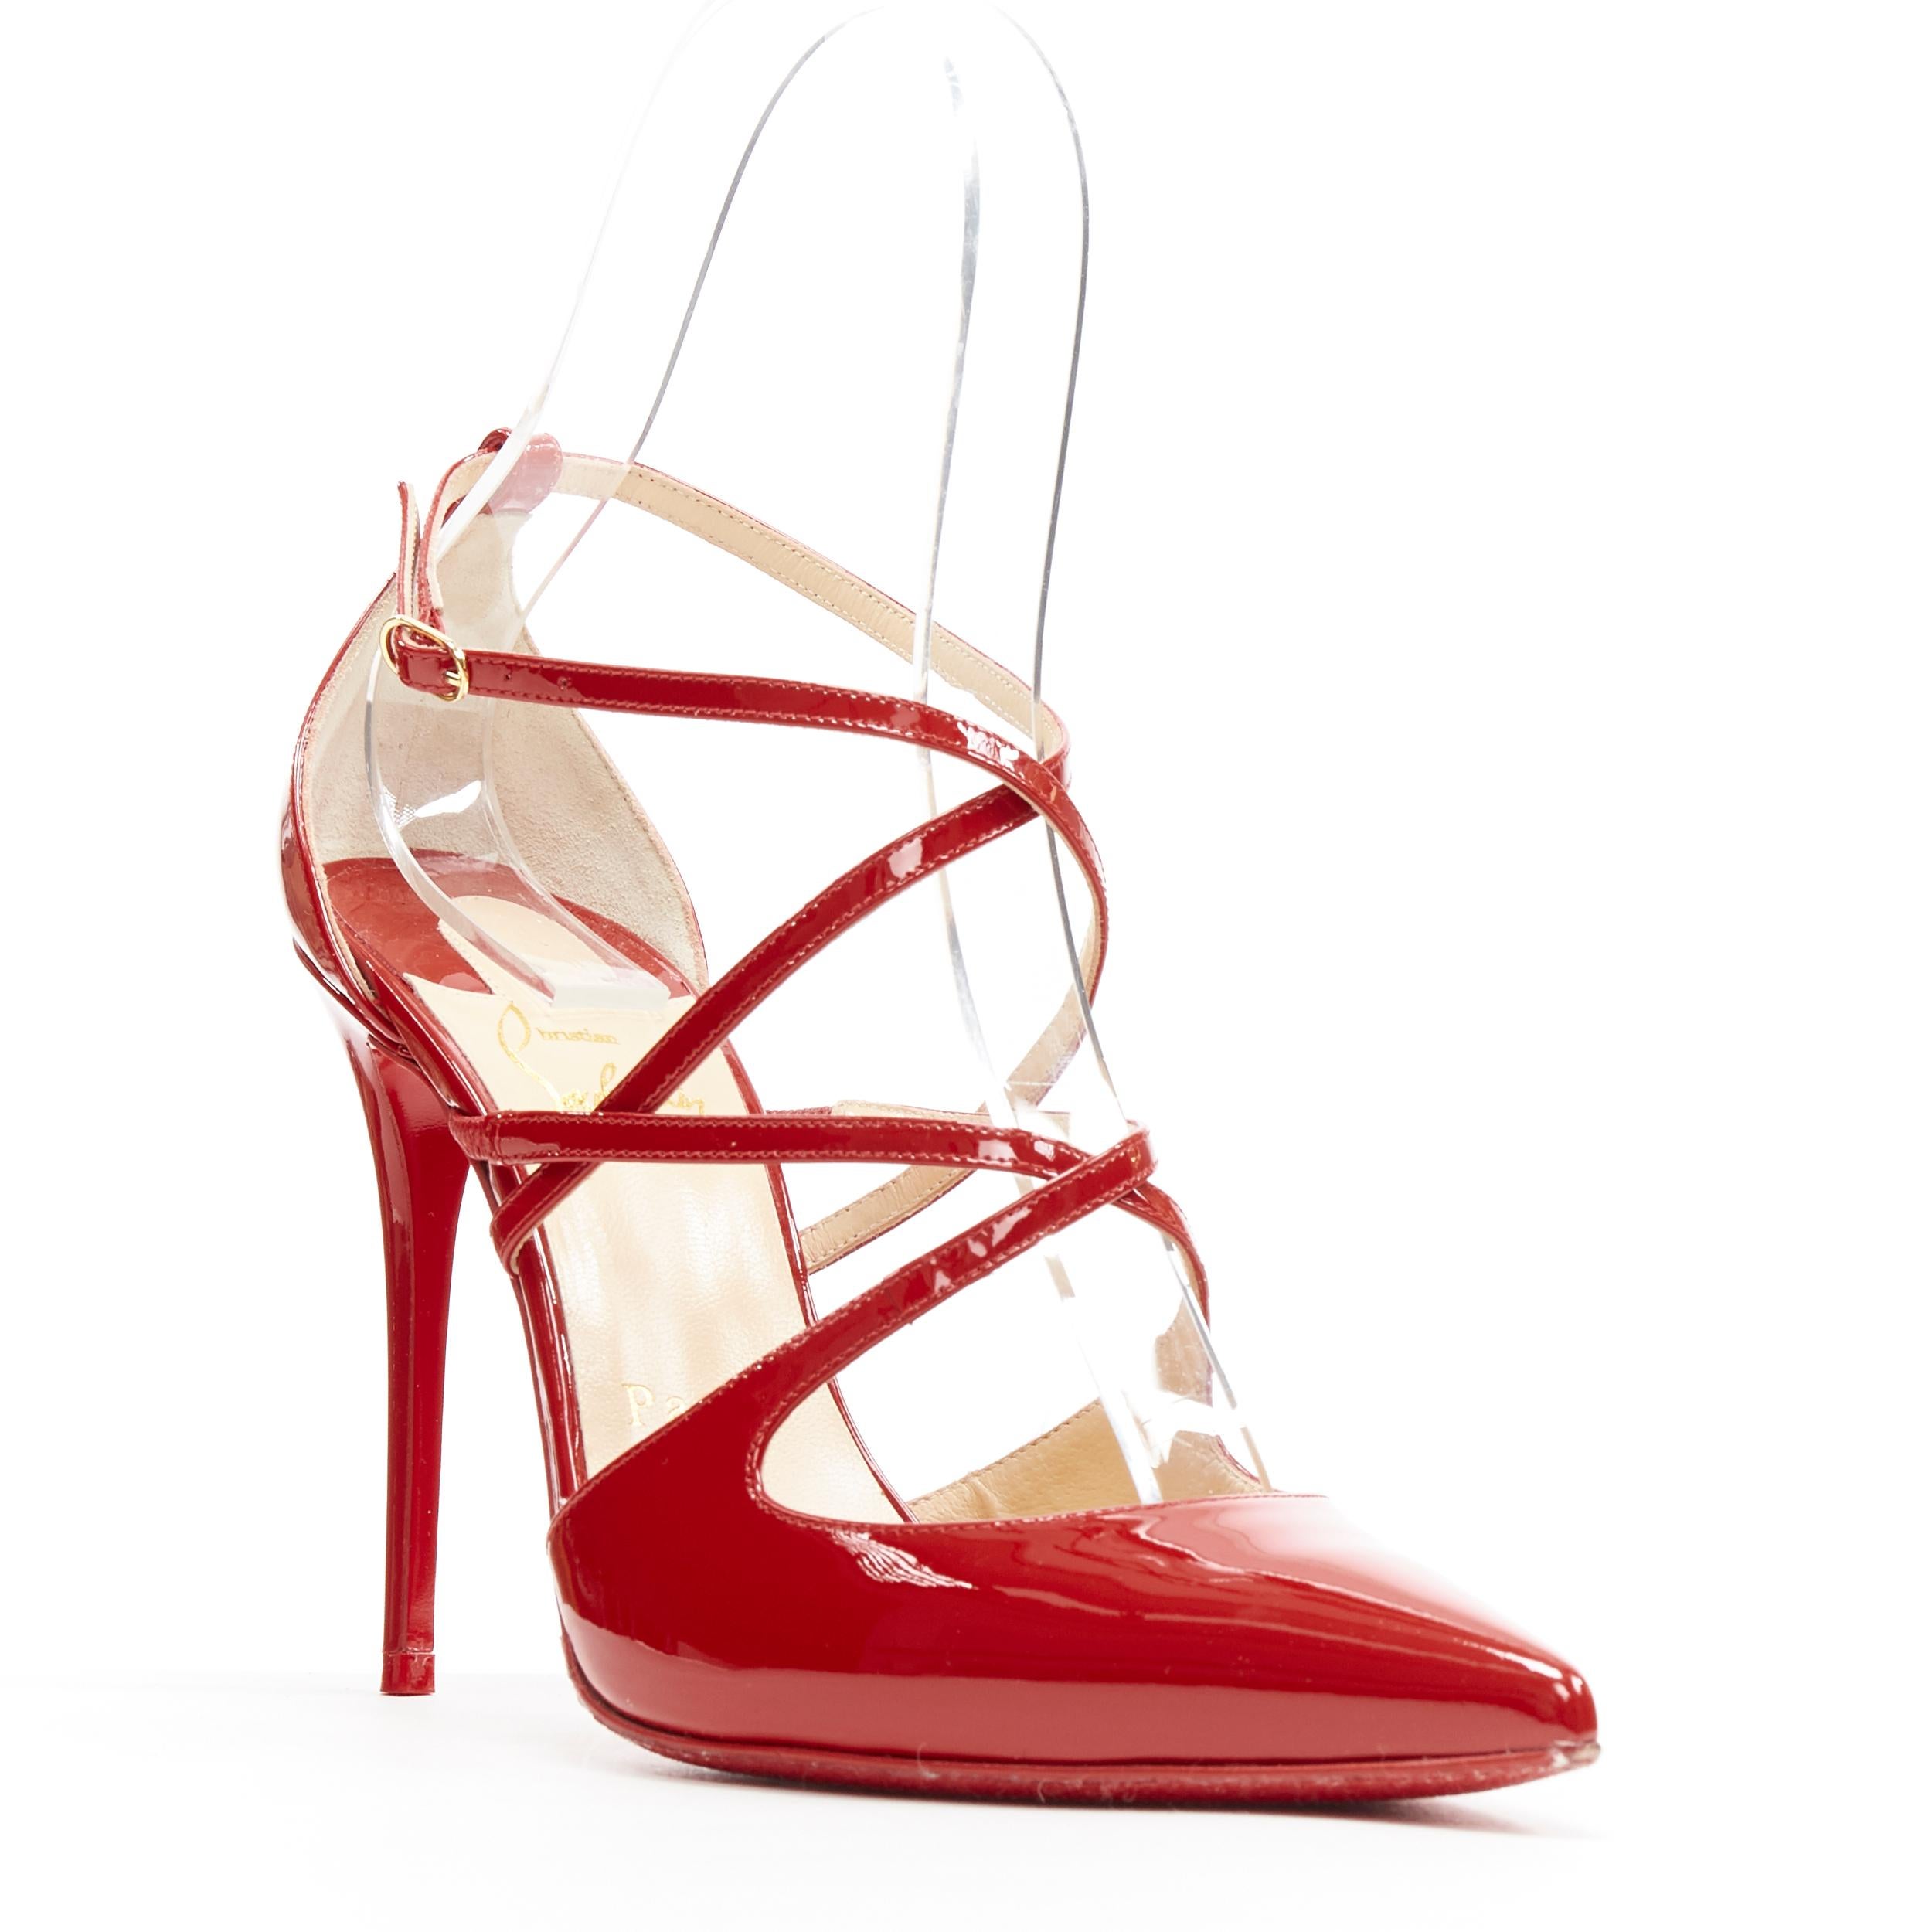 CHRISTIAN LOUBOUTIN Fliketa Loubi red patent strappy point toe pump EU36
Brand: Christian Louboutin
Designer: Christian Louboutin
Model Name / Style: Fliketta
Material: Patent leather
Color: Red
Pattern: Solid
Closure: Ankle strap
Extra Detail: High